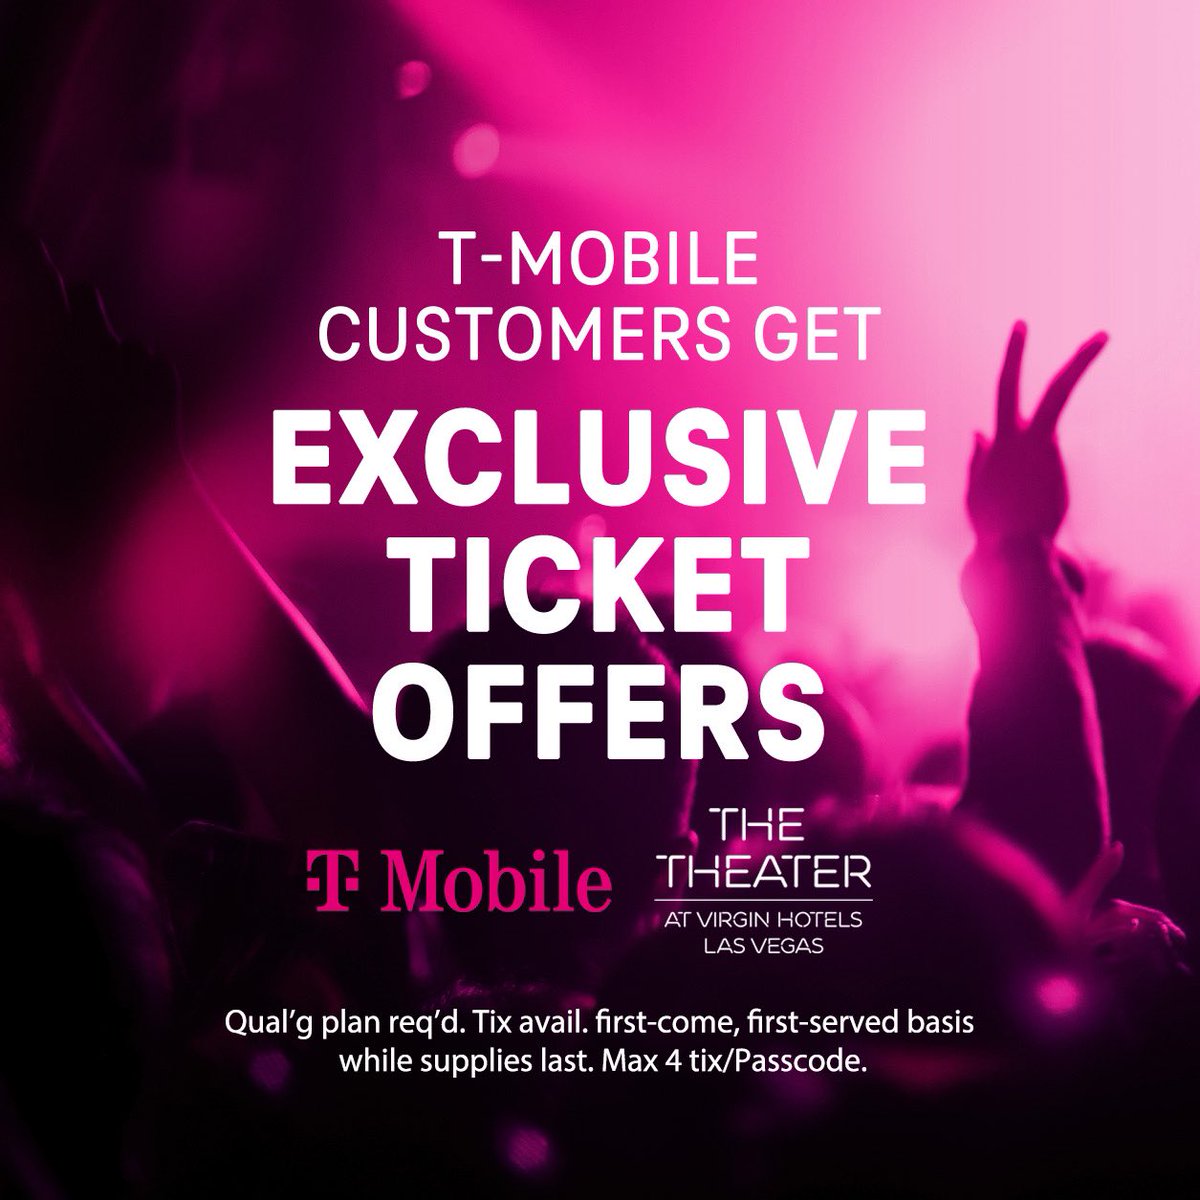 It's the final @TMobile Tuesday of the year - don't let it go to waste! Get your exclusive T-Mobile Concert Perks for The Theater at Virgin Hotels at t-mobile-concert-perks.com/venue/128070